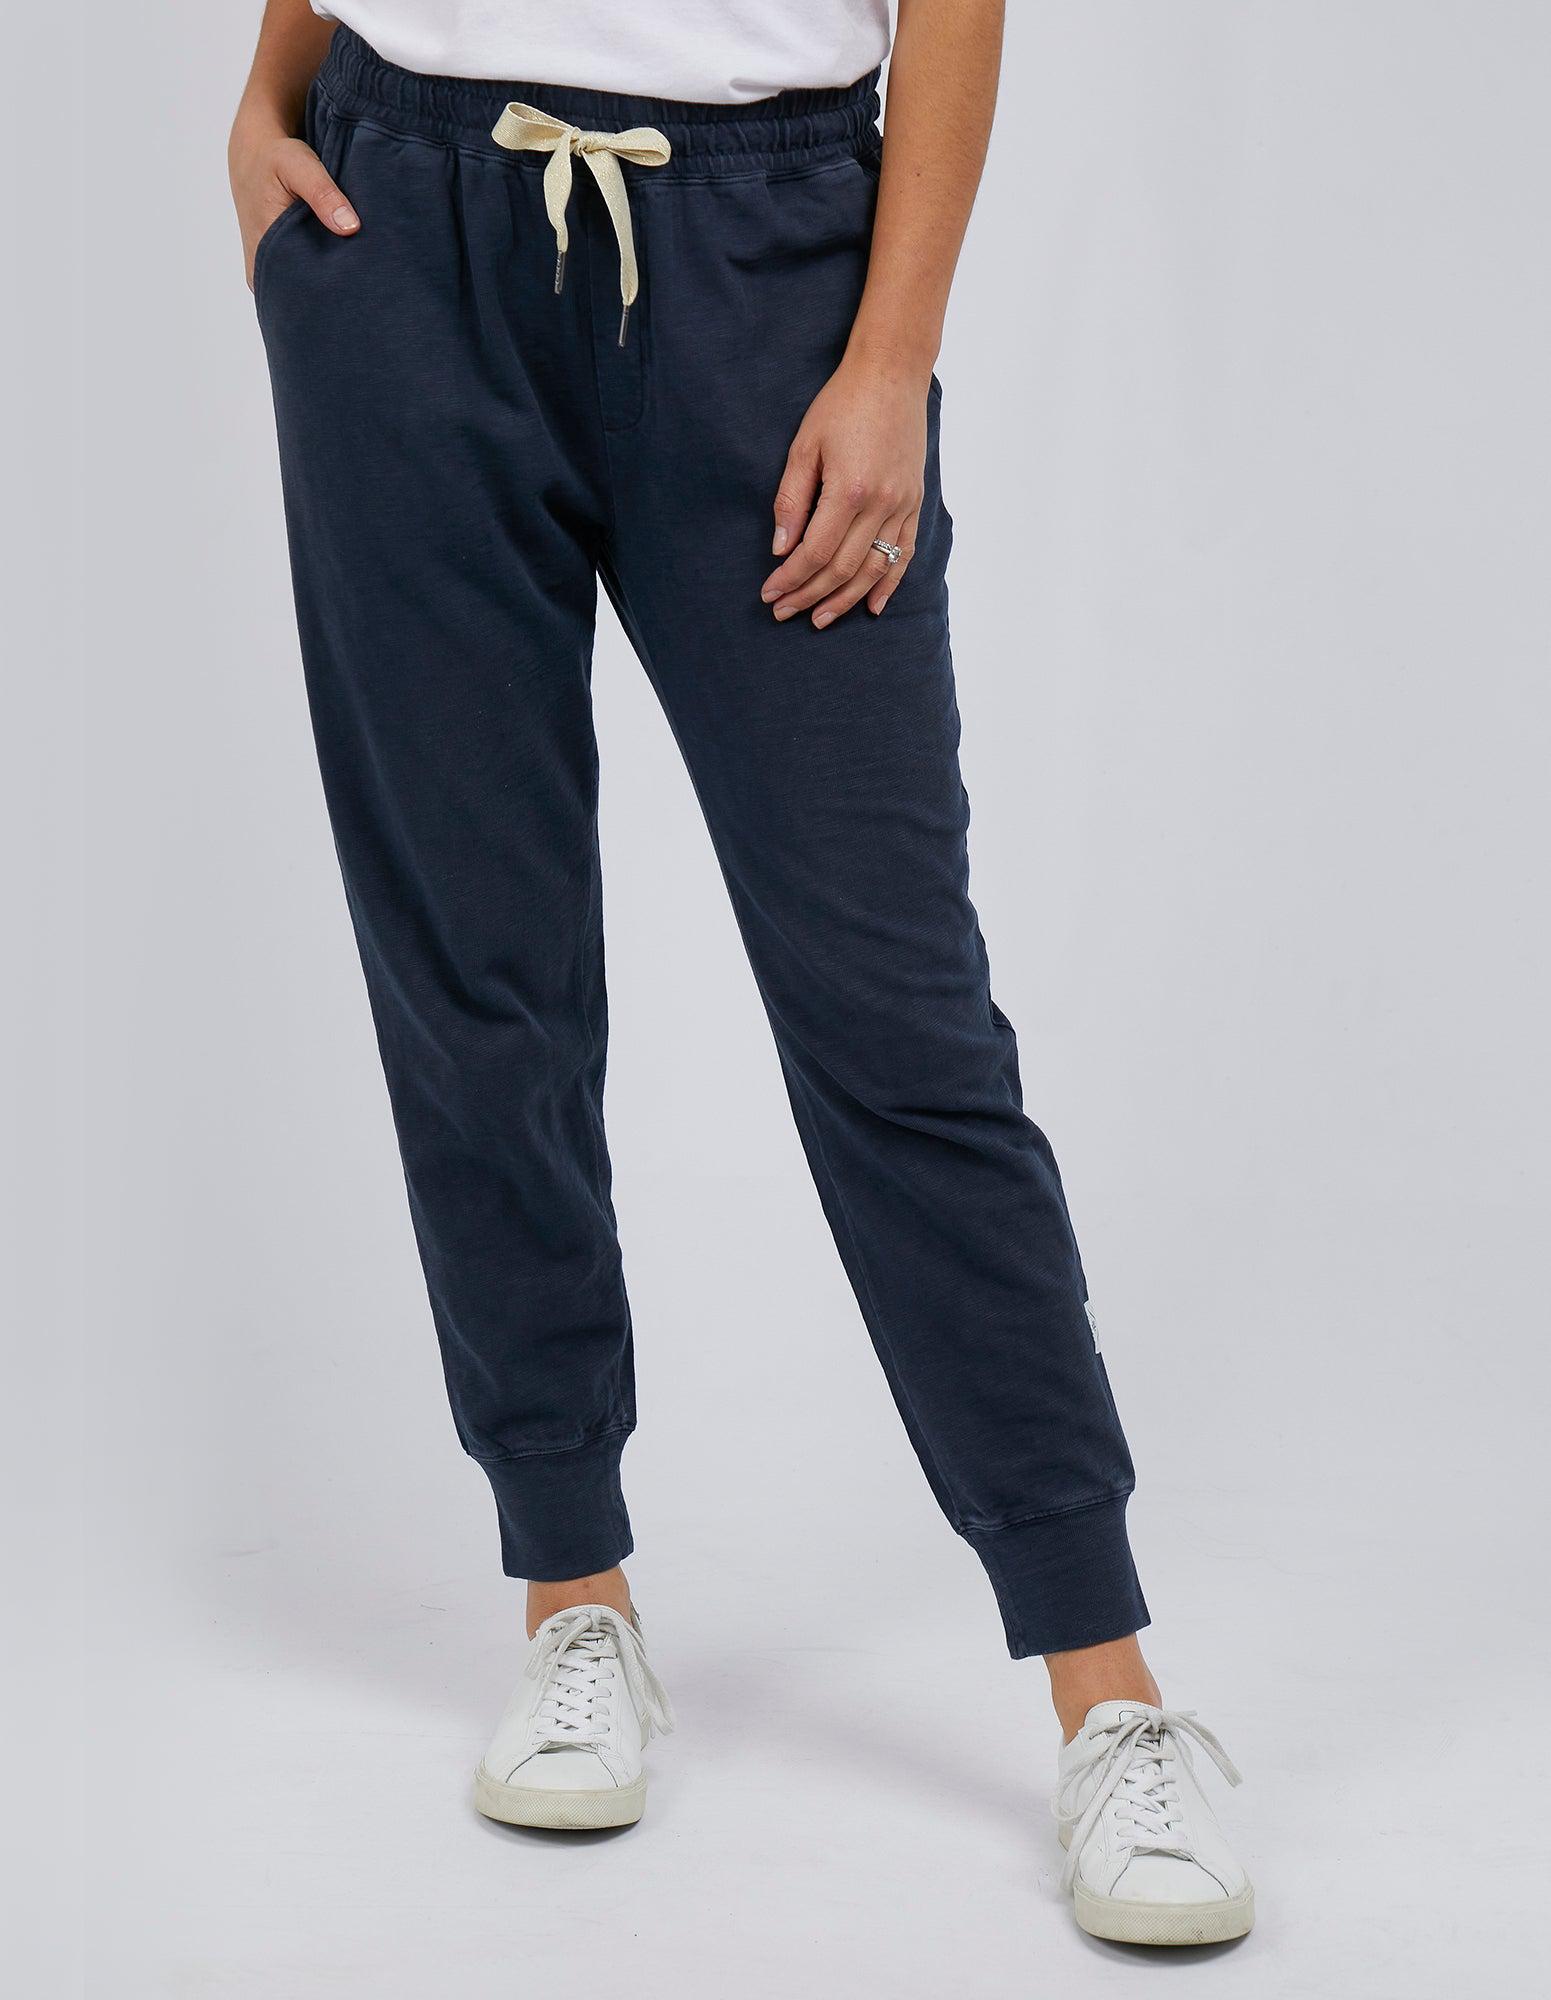 Out & About Pant - Navy - Elm Lifestyle - FUDGE Gifts Home Lifestyle